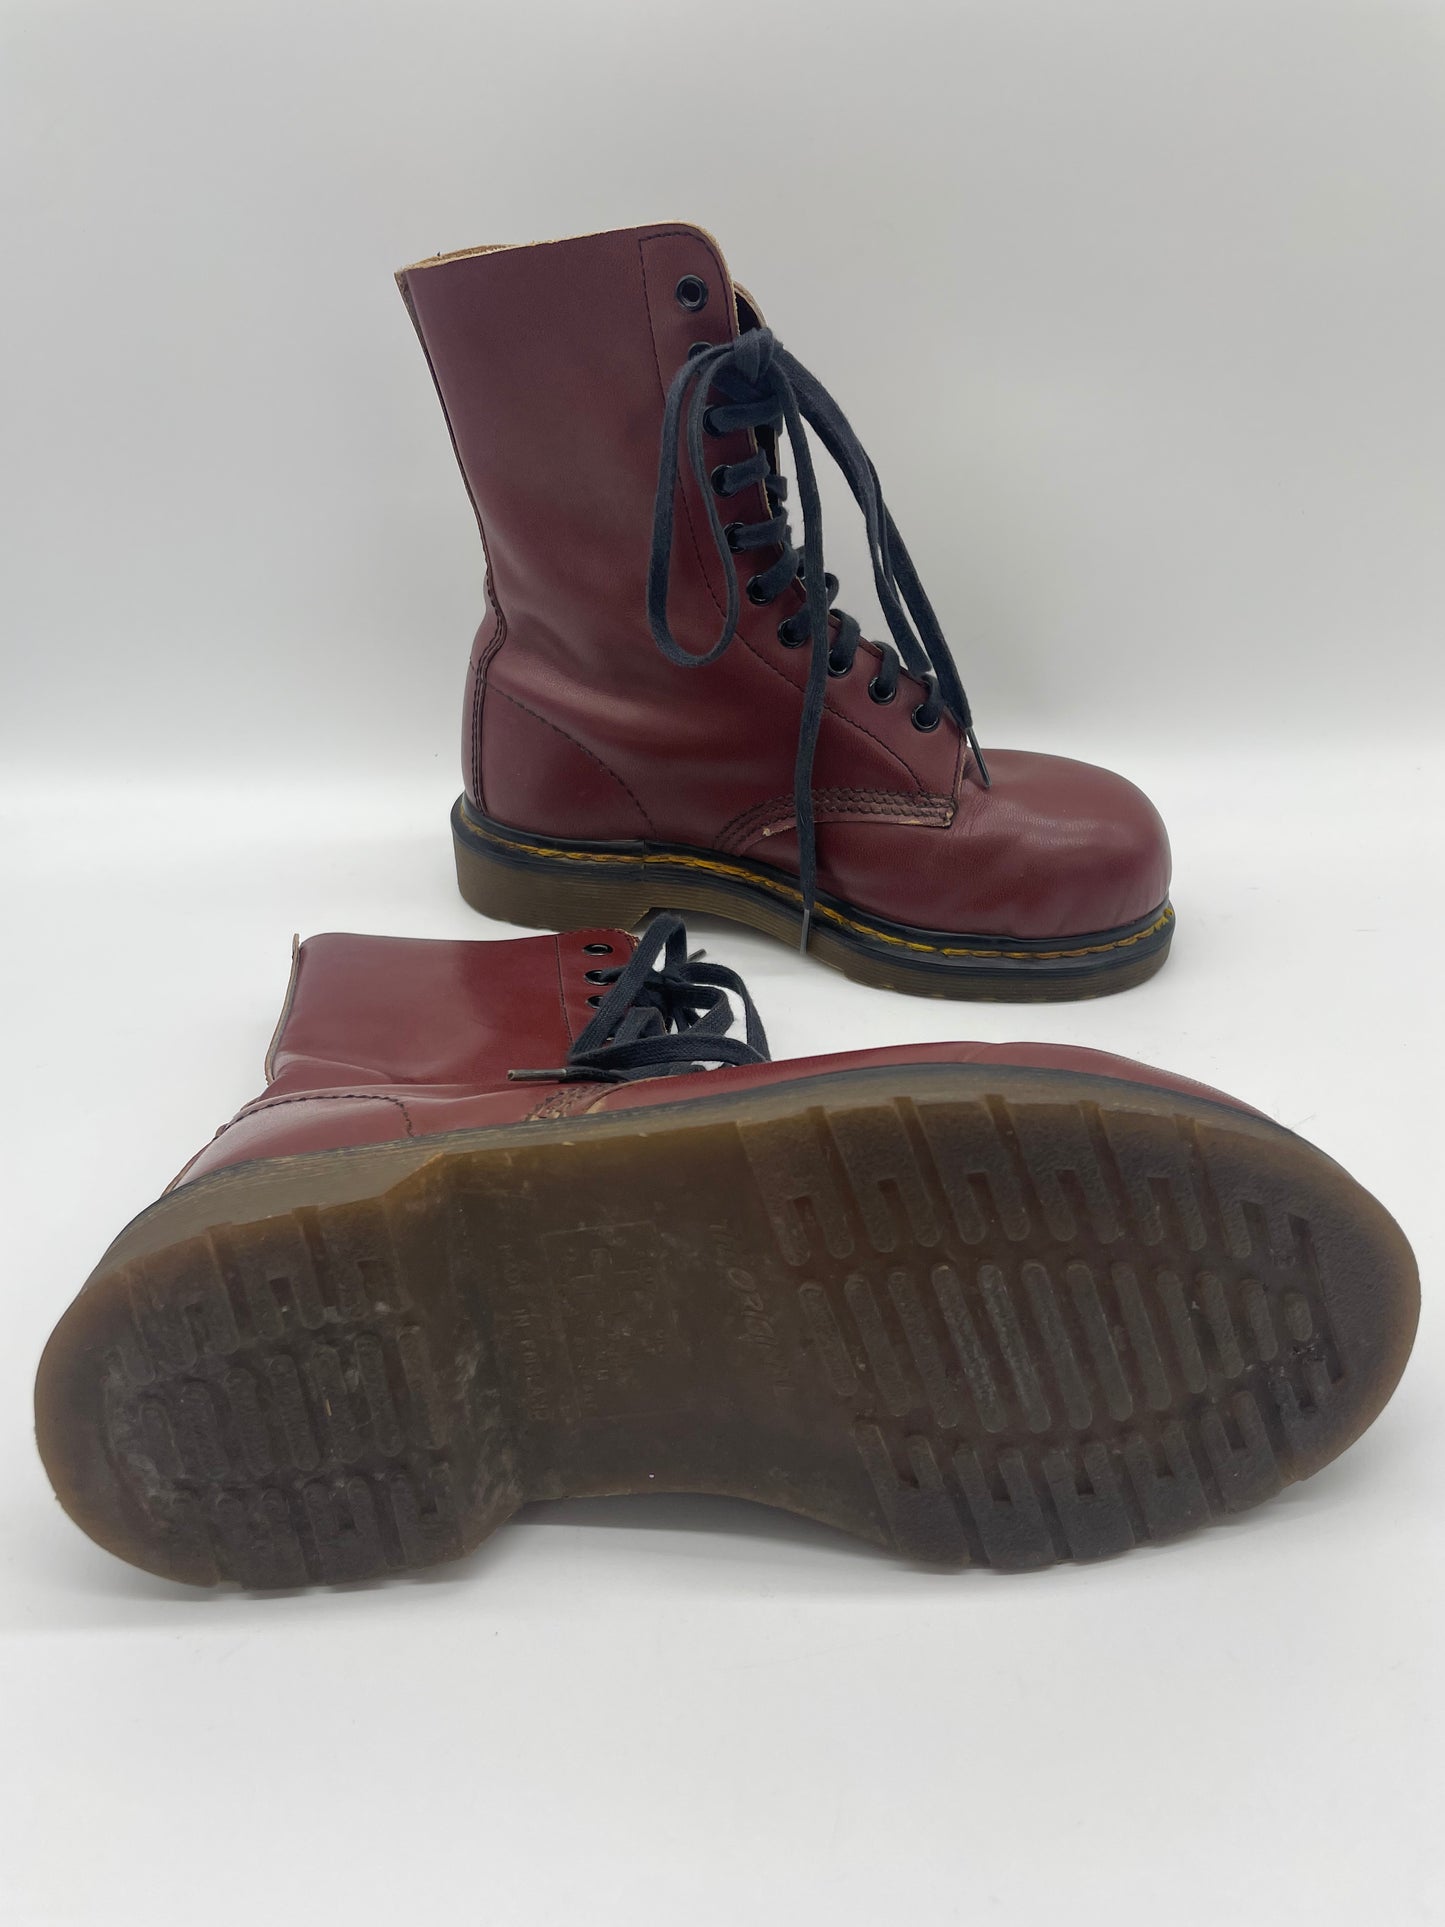 Dr Martens Made in England 1970 - Numero 37.5